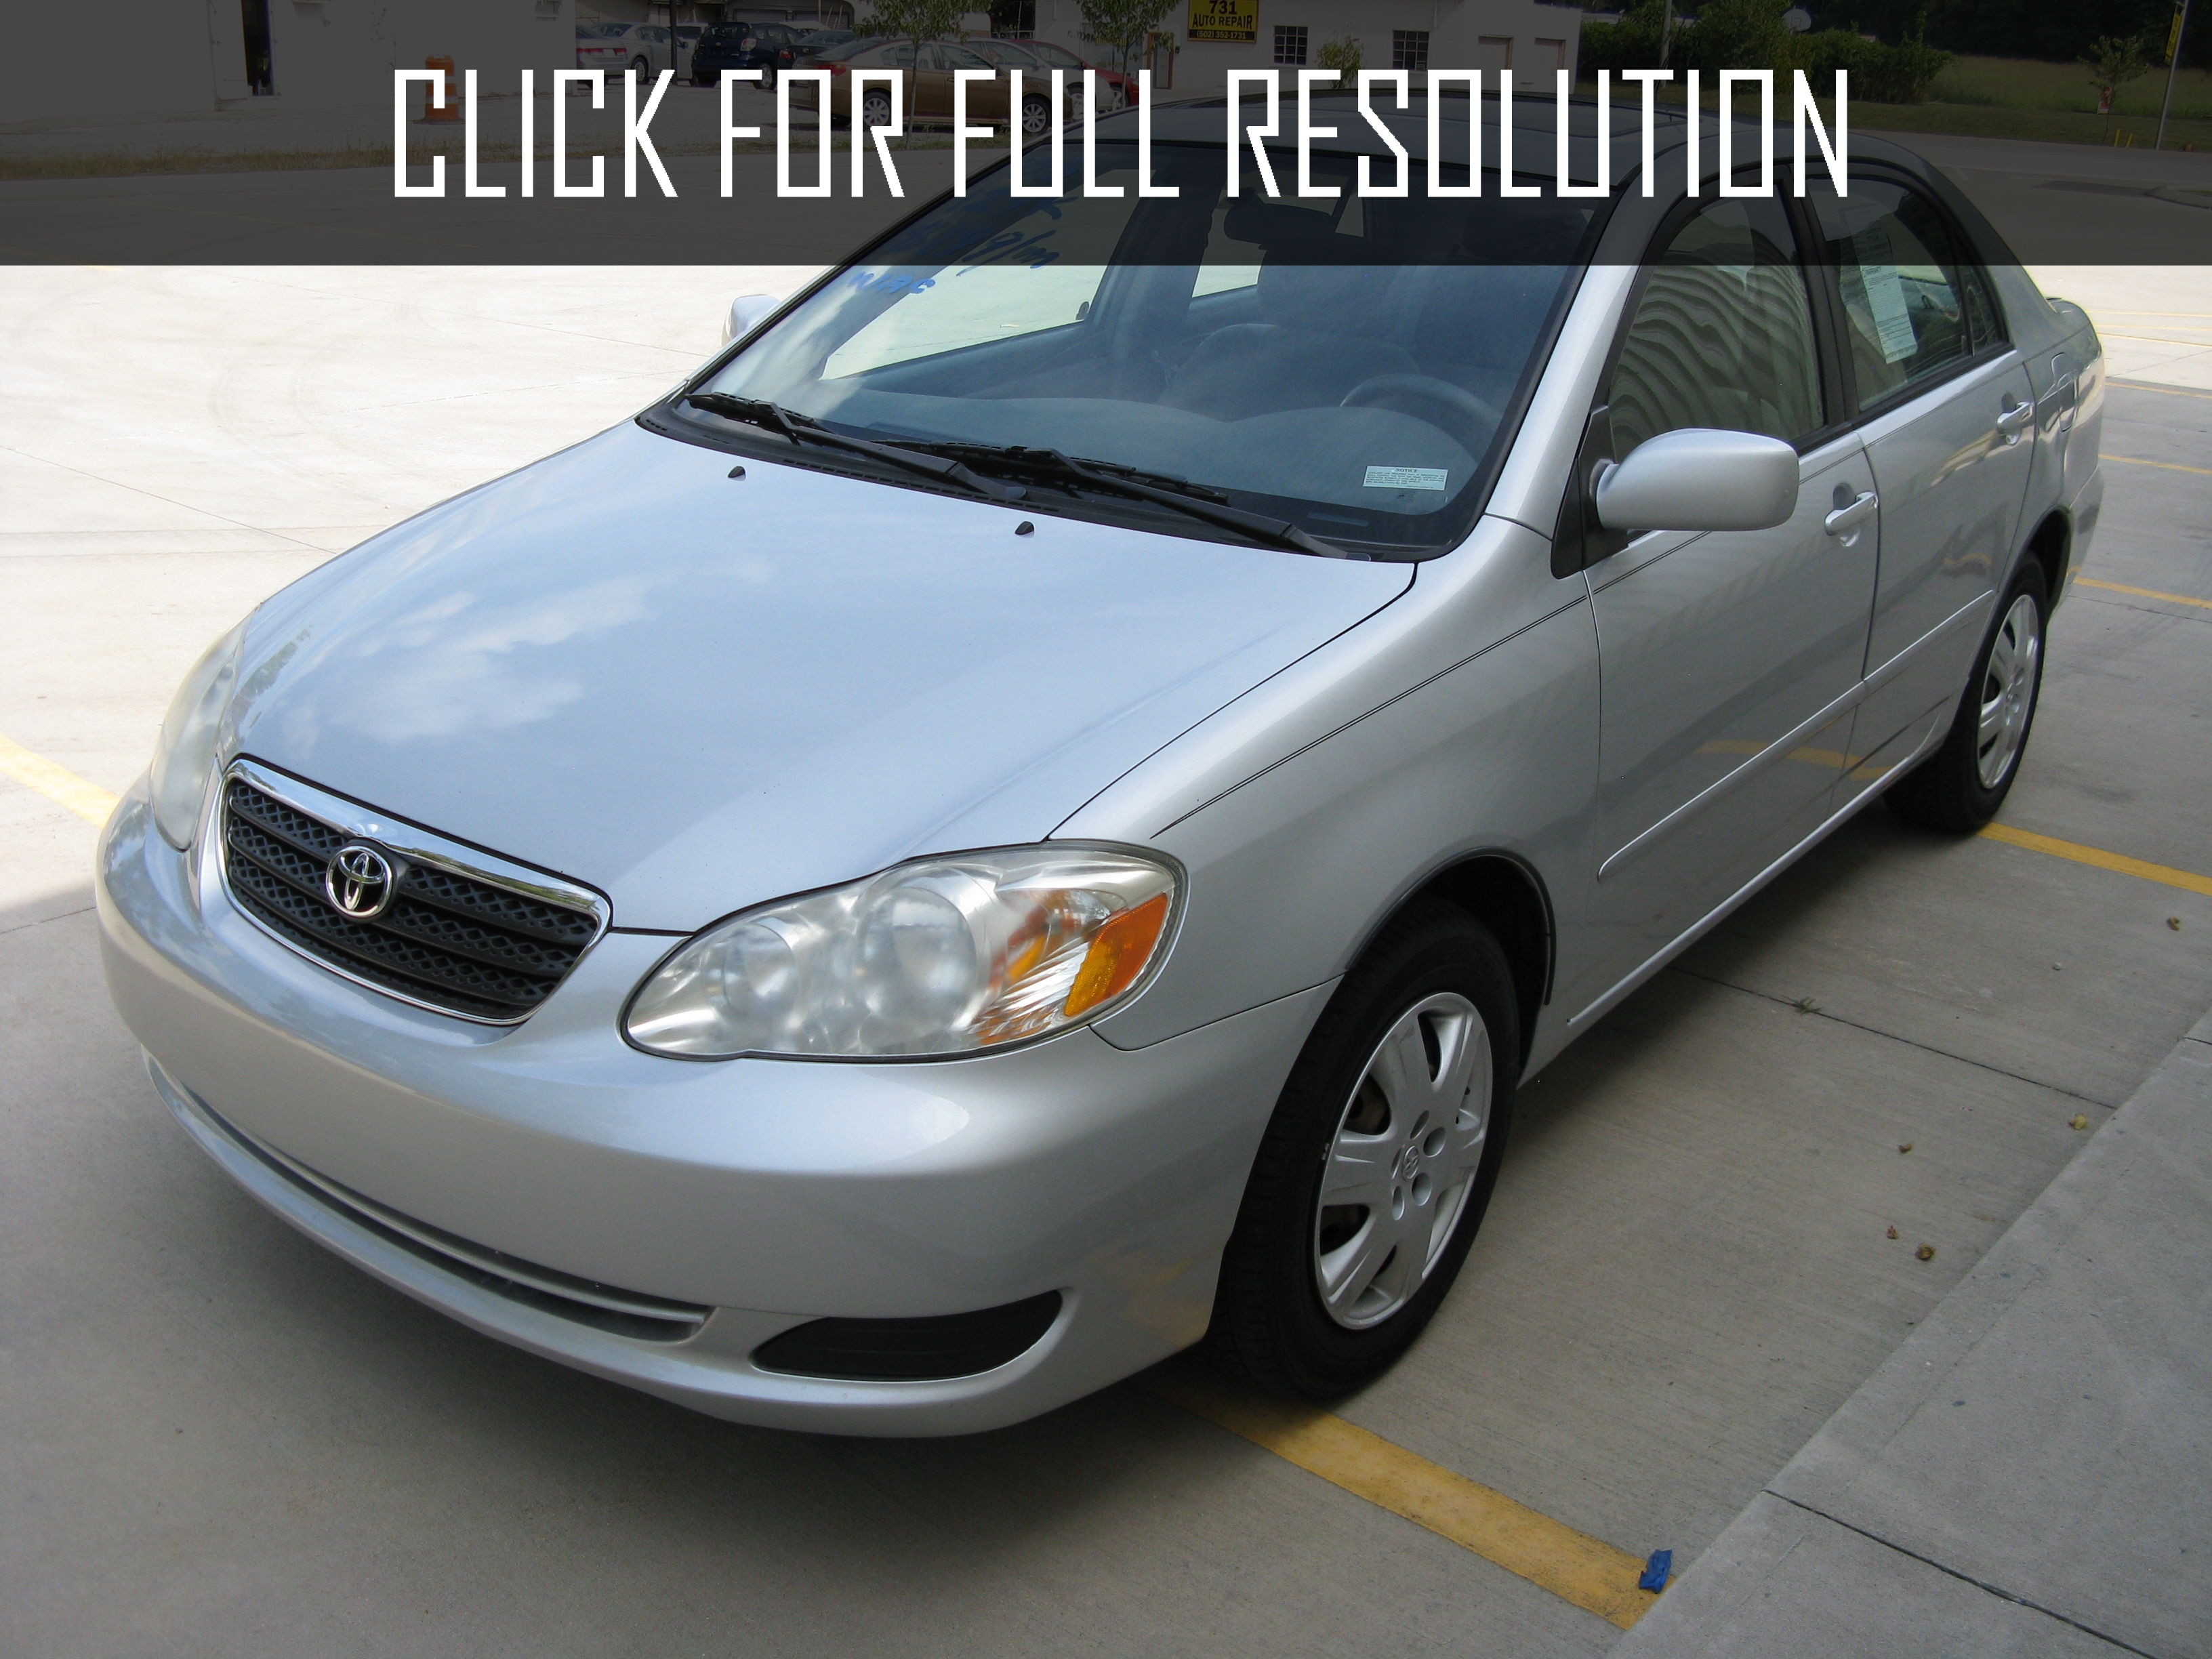 2005 Toyota Corolla Le news, reviews, msrp, ratings with